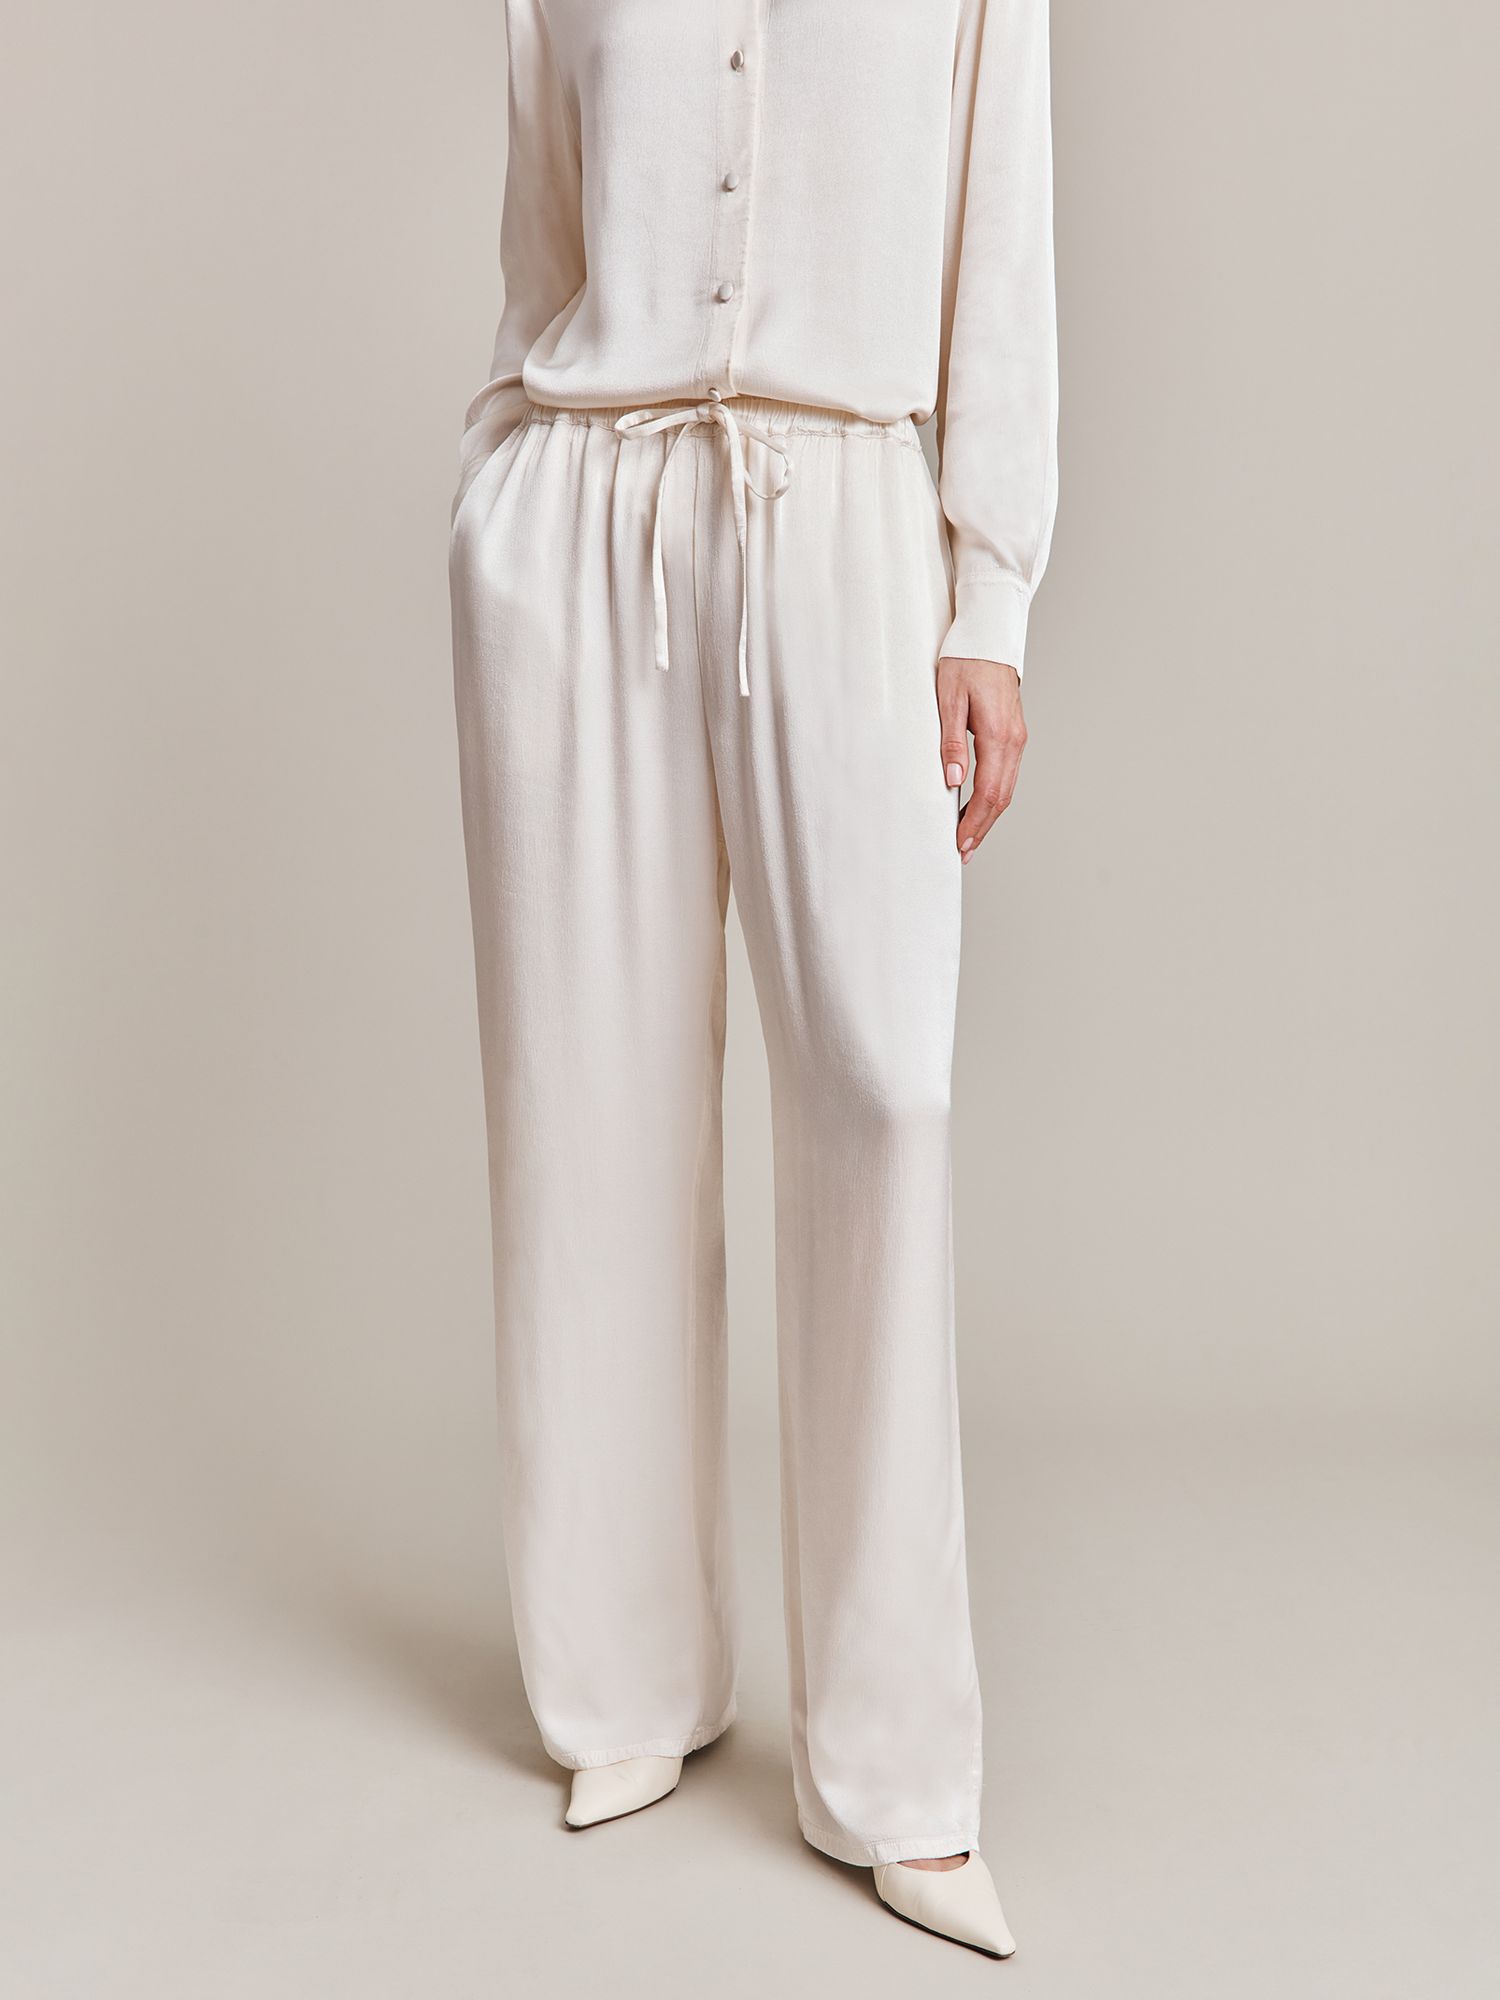 Ghost Imogen Palazzo Trousers, Ivory at John Lewis & Partners